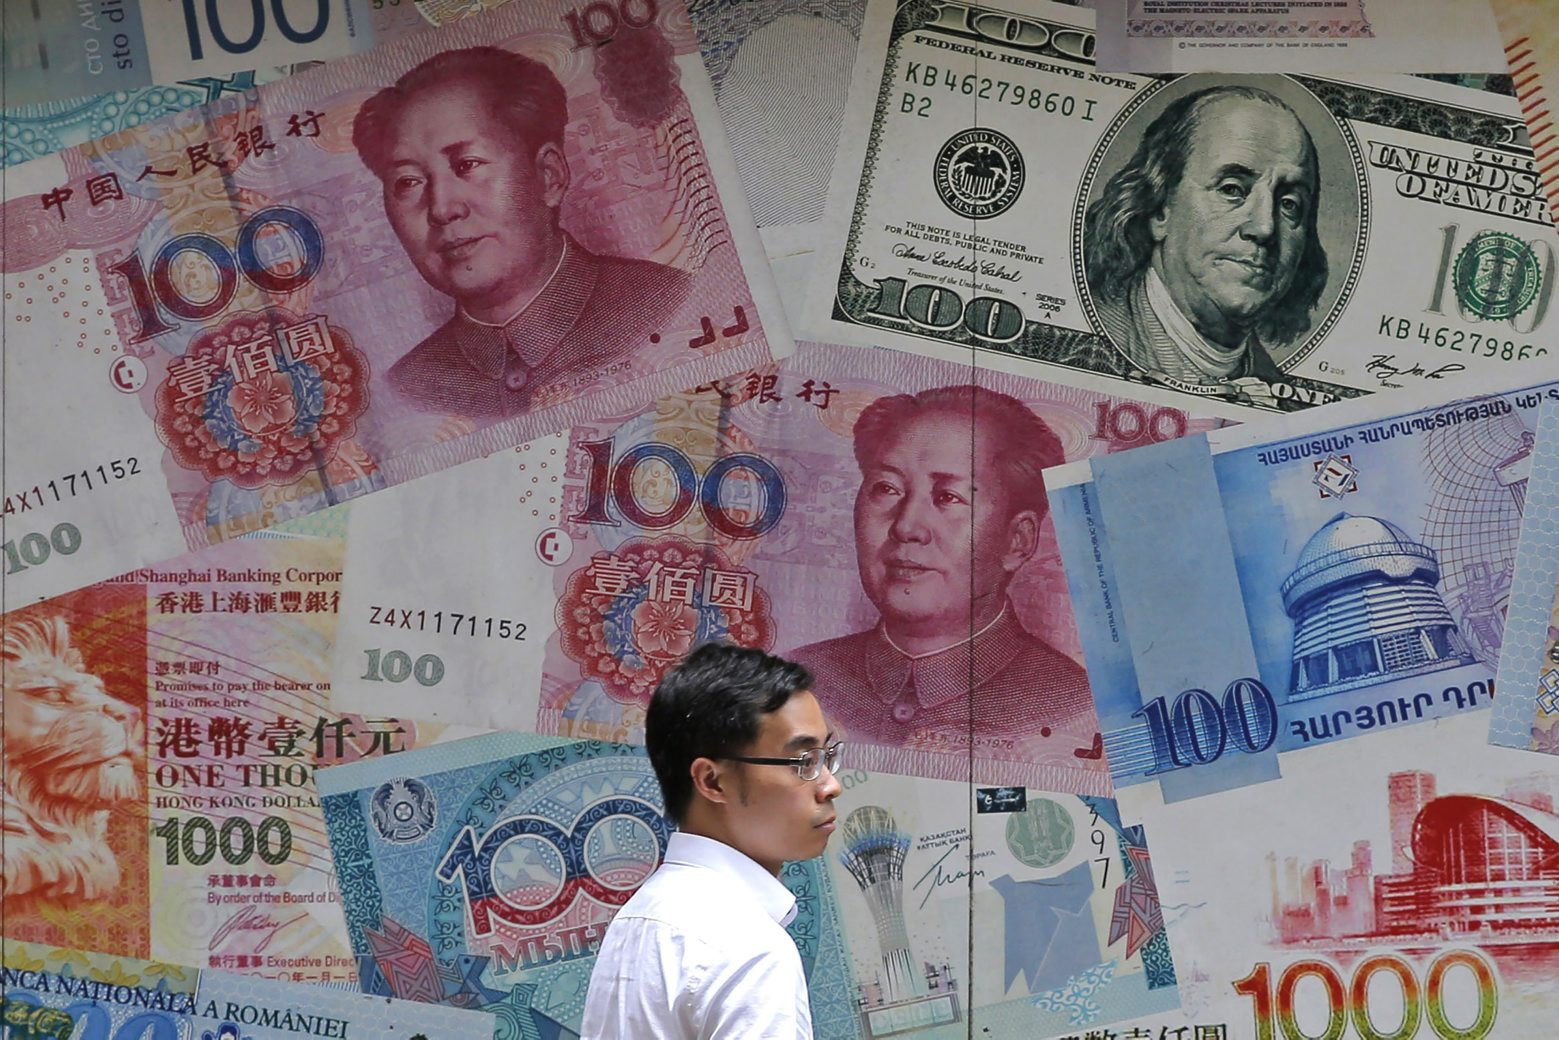 FILE - In this June 10, 2019, file photo, a man walks past a money exchange shop decorated with different banknotes at Central, a business district of Hong Kong. China's yuan fell below the politically sensitive level of seven to the U.S. dollar on Monday, Aug. 5, 2019, possibly adding to trade tension with Washington. The currency weakened to 7.0177 in early trading following U.S. President Donald Trump's threat last week of tariff hikes on additional Chinese imports in a fight over Beijing's trade surplus and technology policies. (AP Photo/Kin Cheung, File) China Sinking Yuan